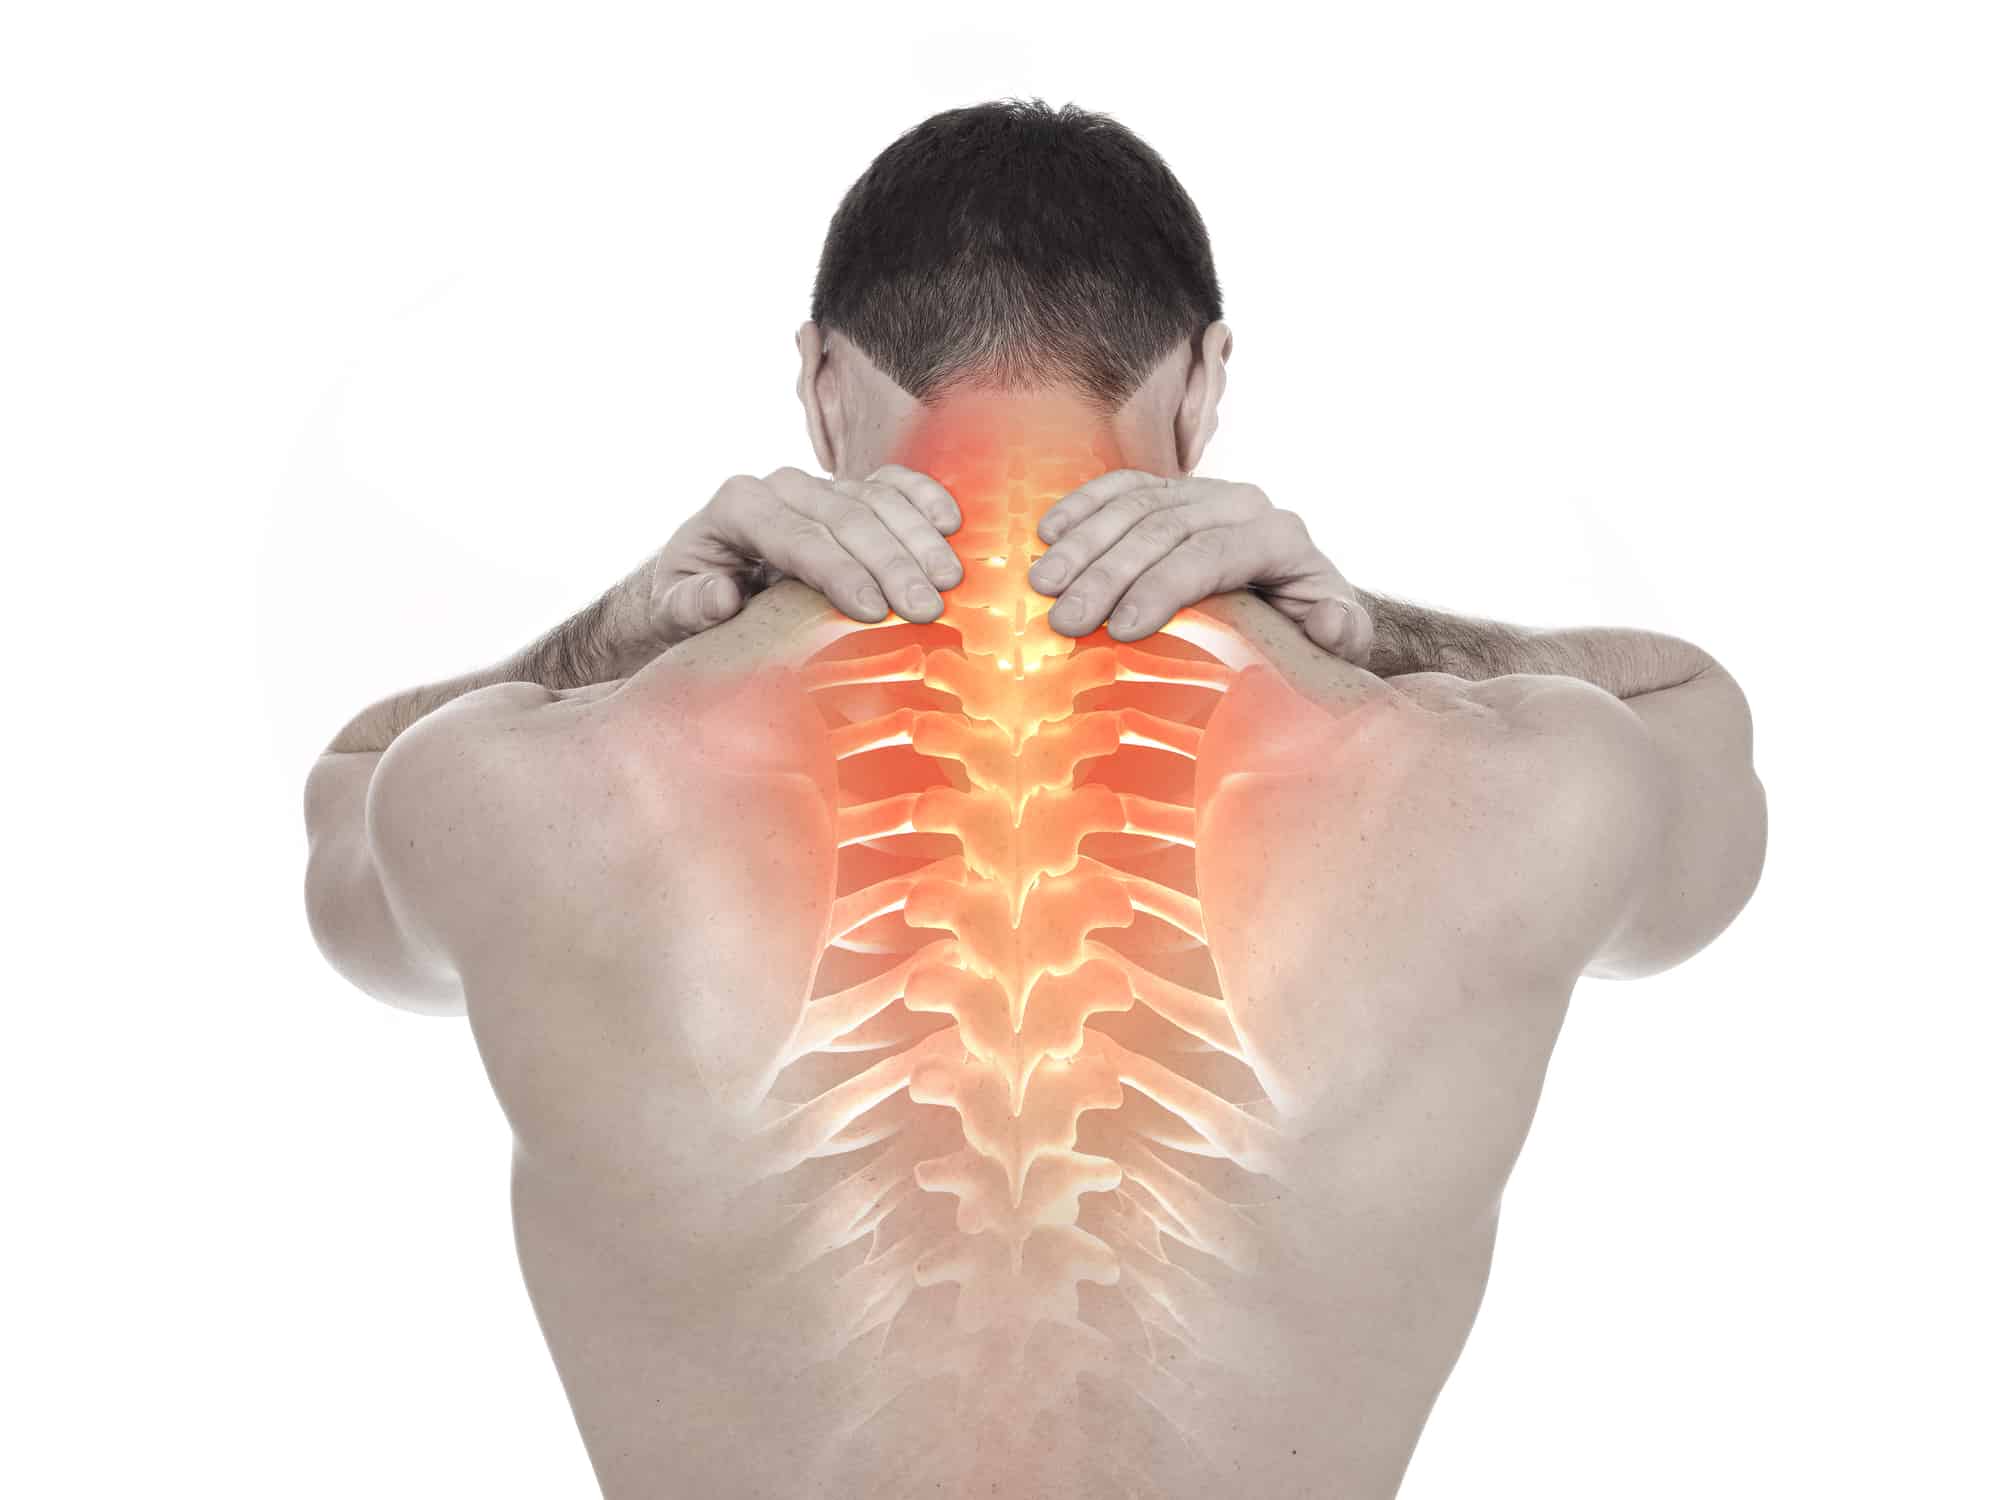 Why Am I Experiencing Neck Pain?